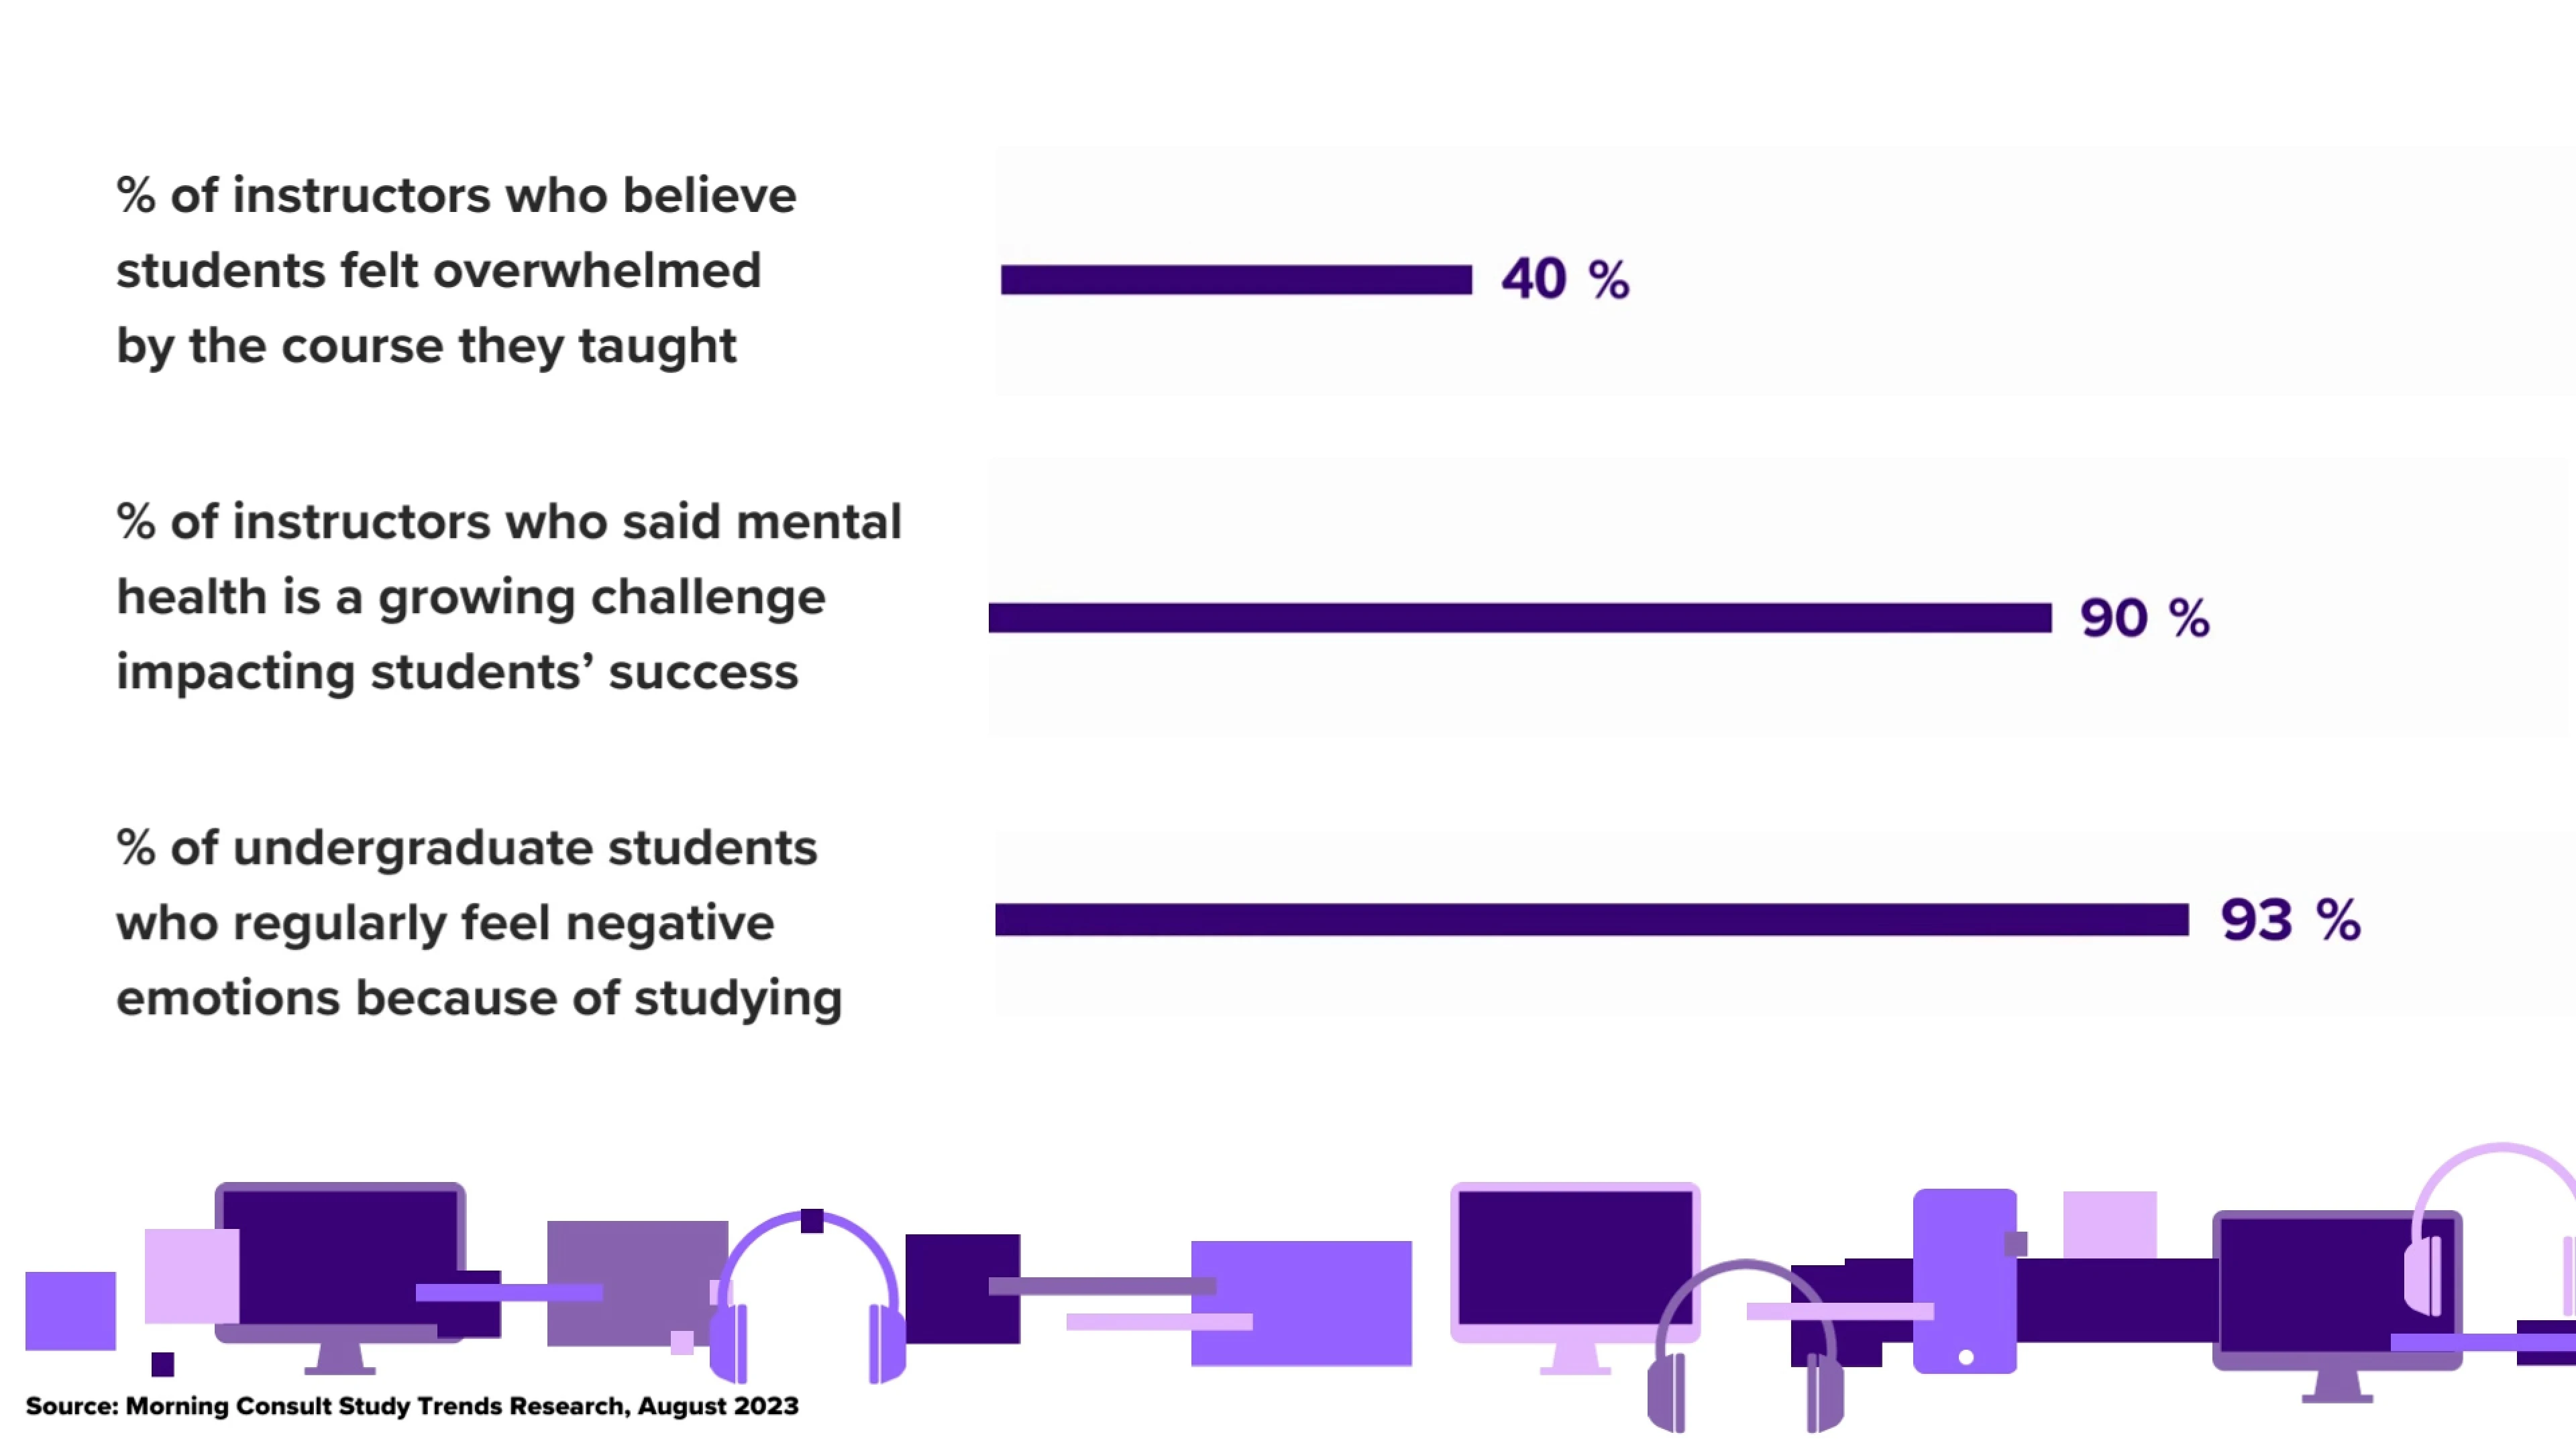 % of instructors who believe students felt overwhelmeed by the course they taught, who said mental health is a growing challenge, and undergrad students who regularly feel negaitve emotions due to studying